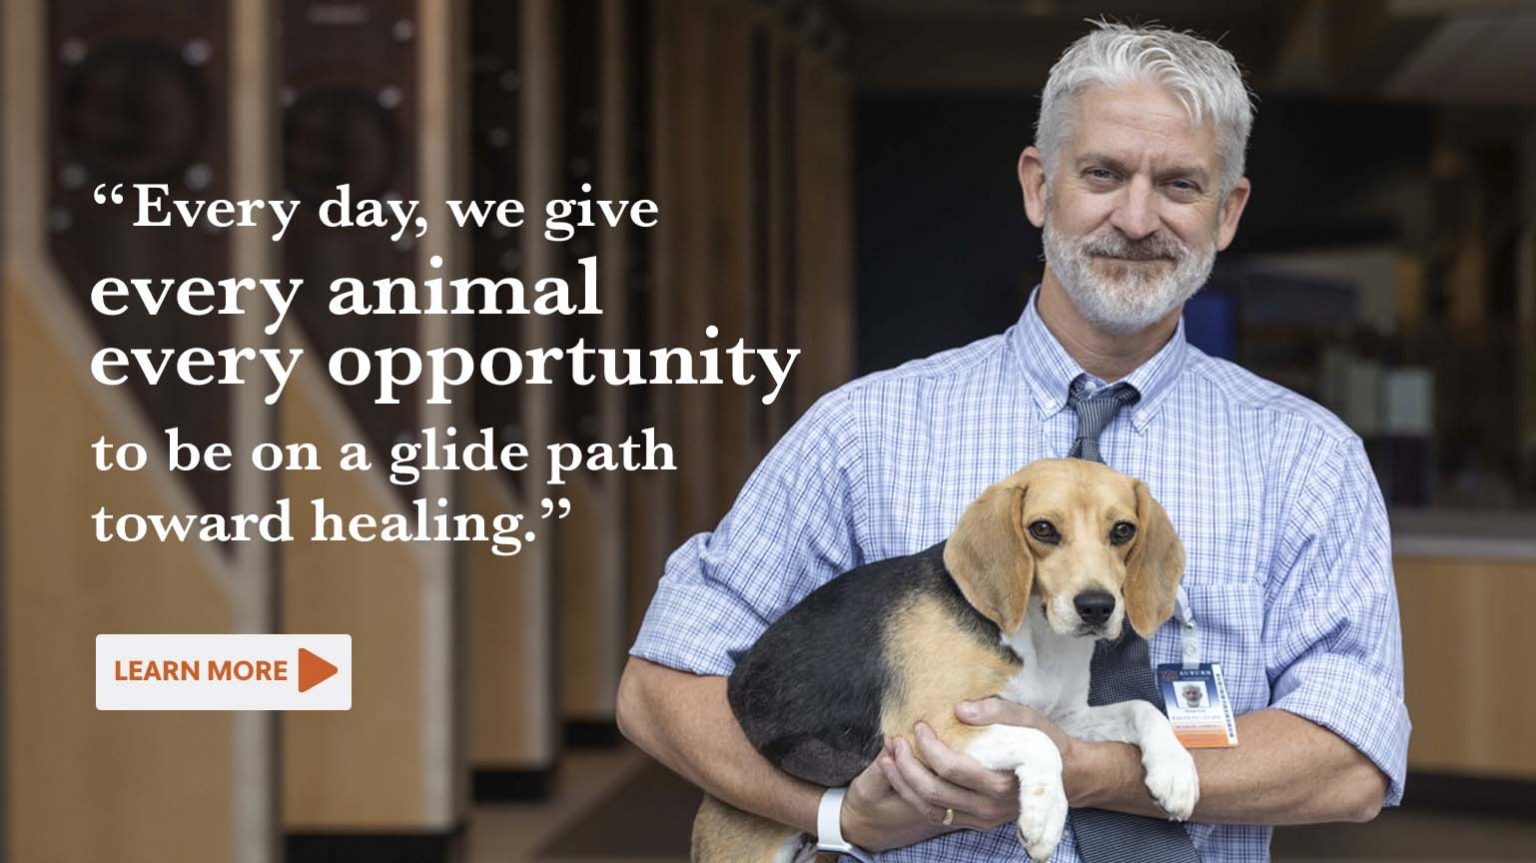 Every day, we give every animal every opportunity to be on a glide path toward healing.